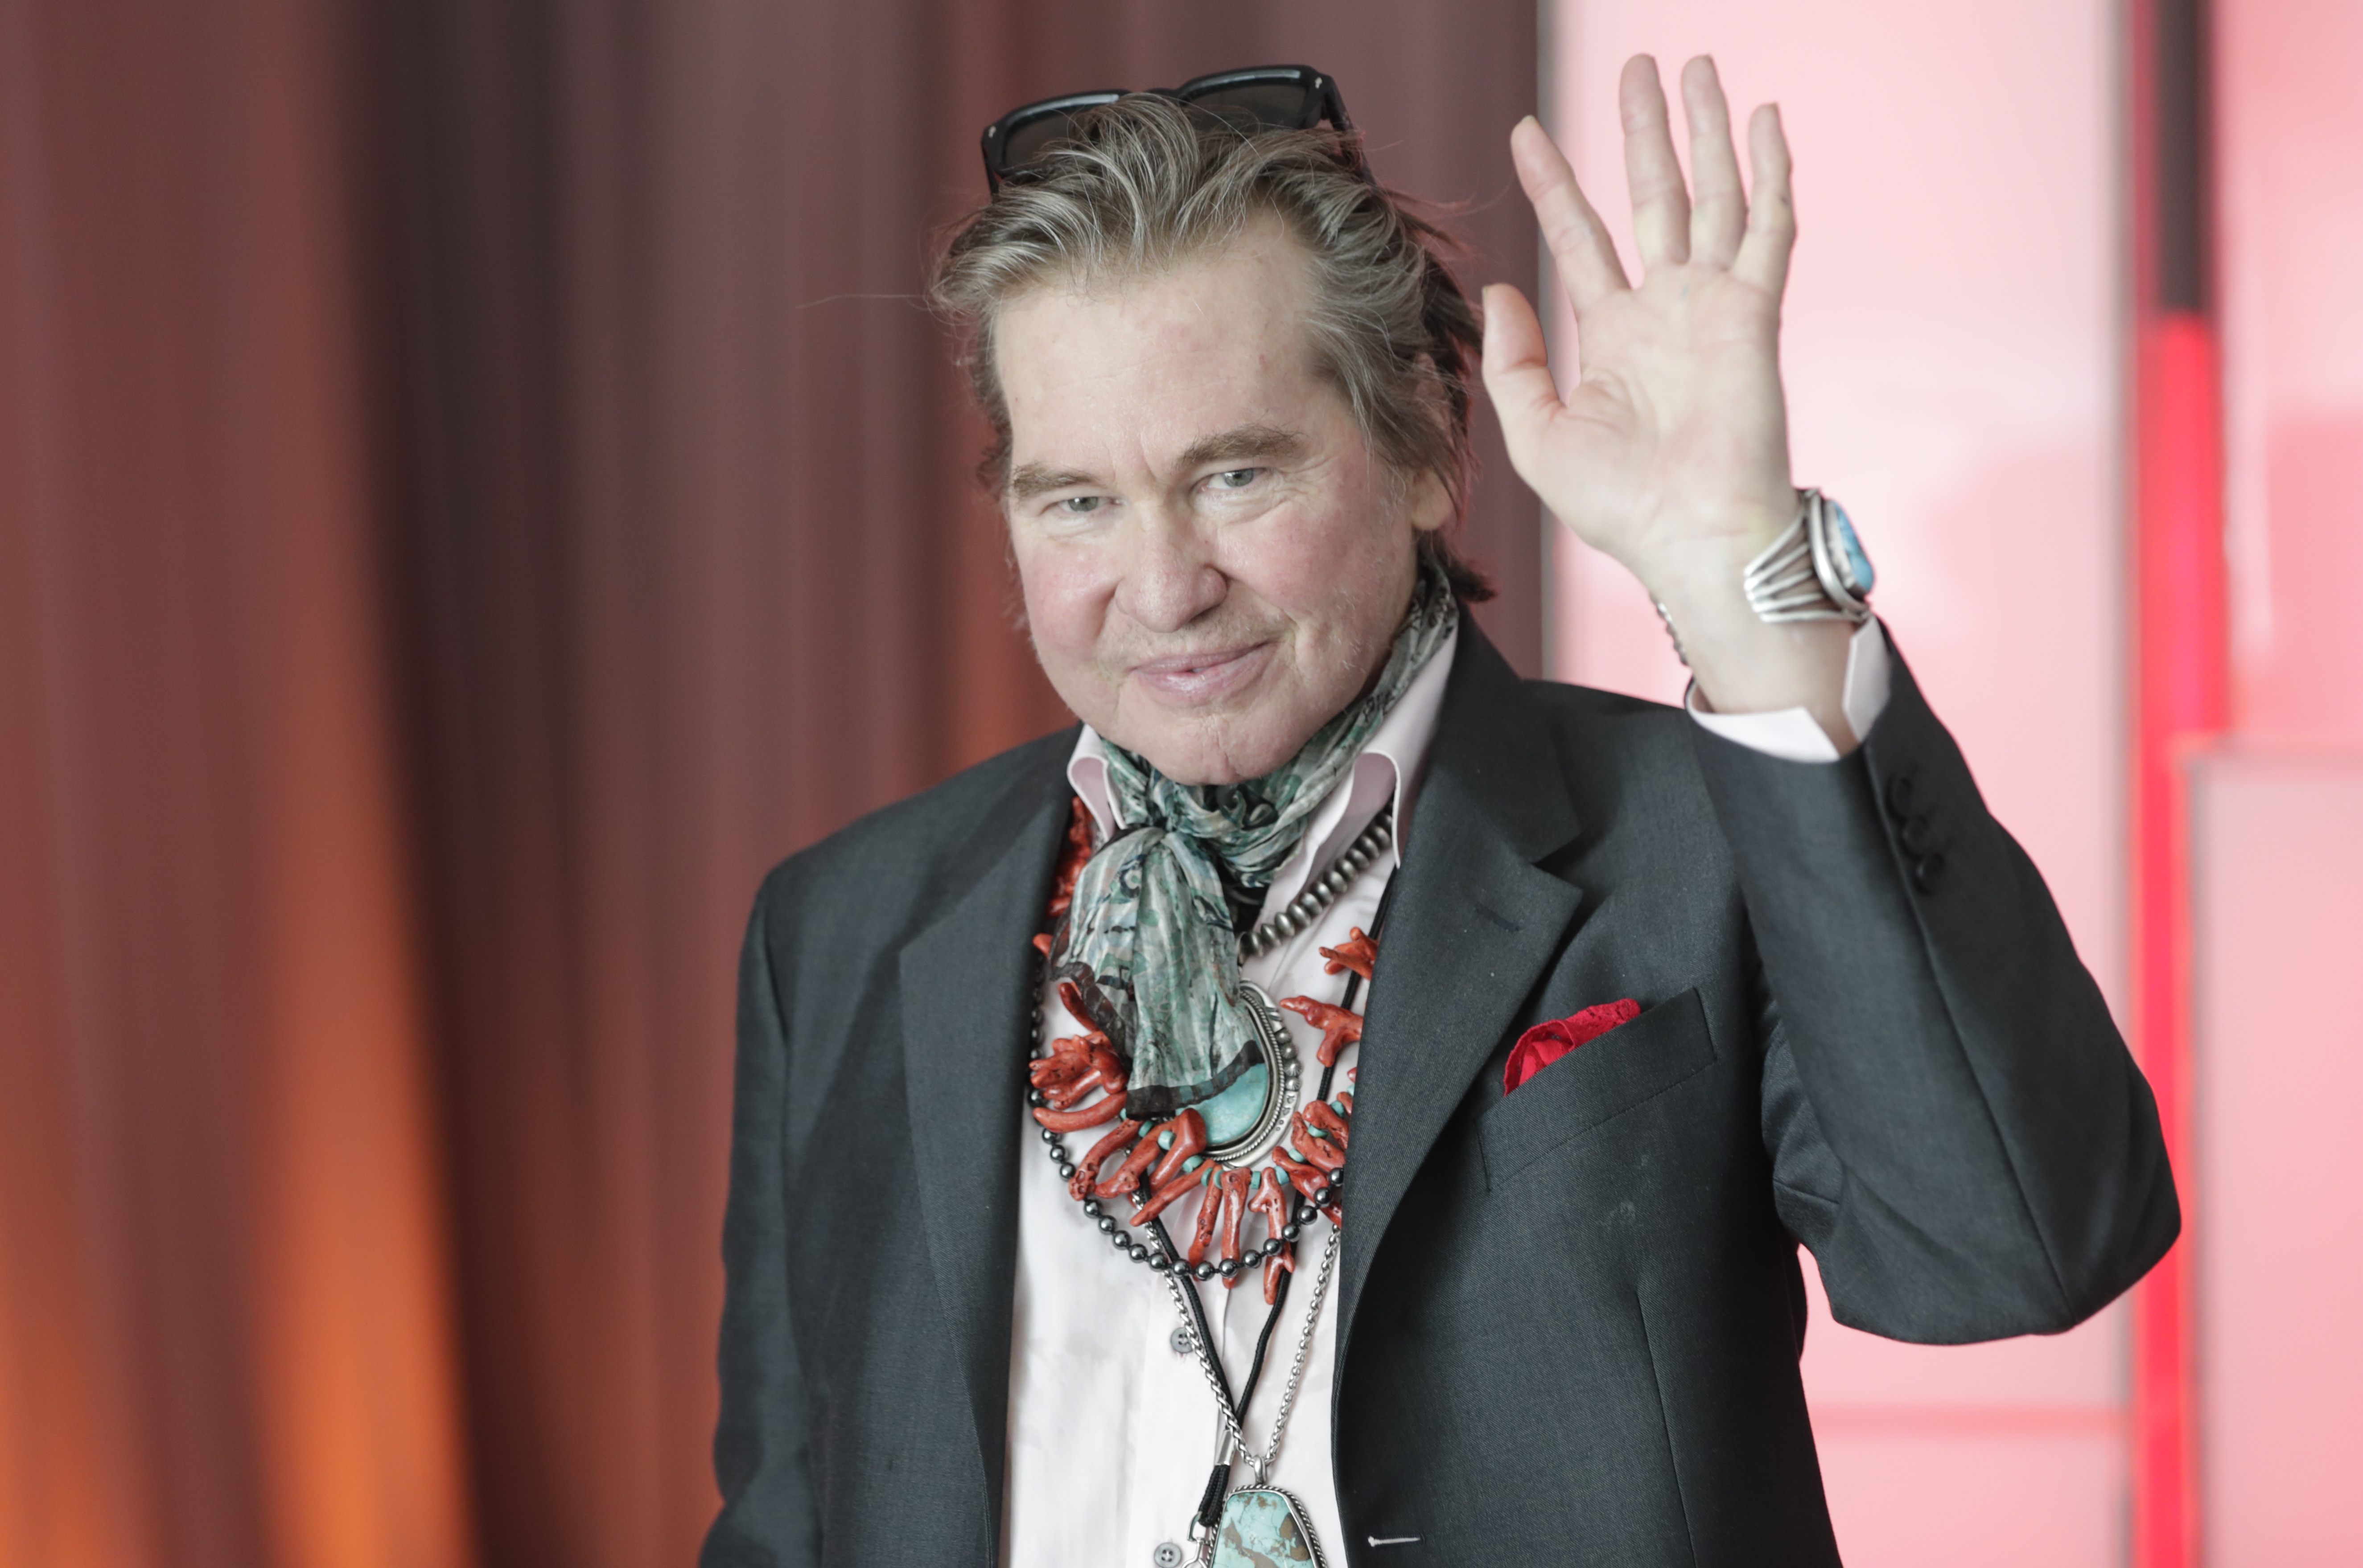 Val Kilmer at the United Nations headquarters in New York City to promote the 17 Sustainable Development Goals (SDGs) initiative, July 20, 2019 | Source: Getty Images